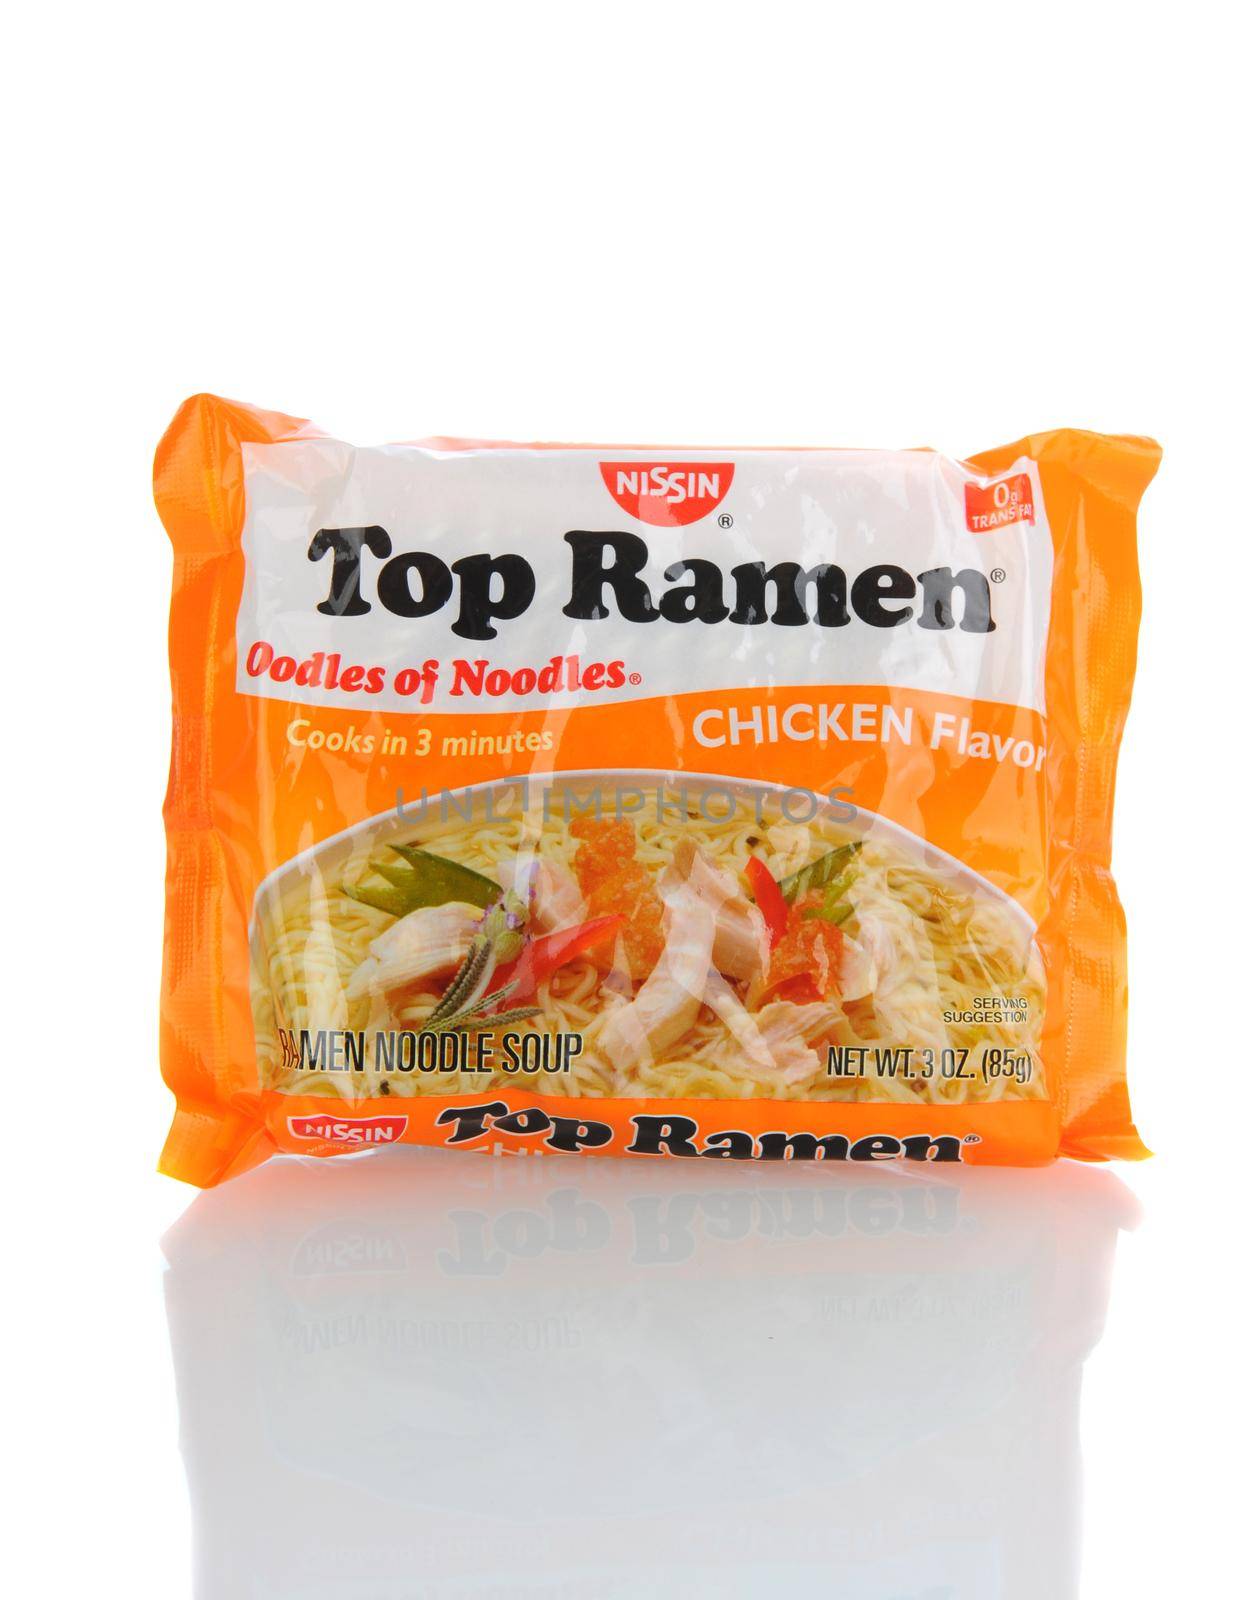 IRVINE, CA - January 21, 2013: A 3 ounce package of Top Ramen Chicken Flavor. Manufactured by Nissin Foods, Top Ramen is a favorite ramen noodle since 1970.